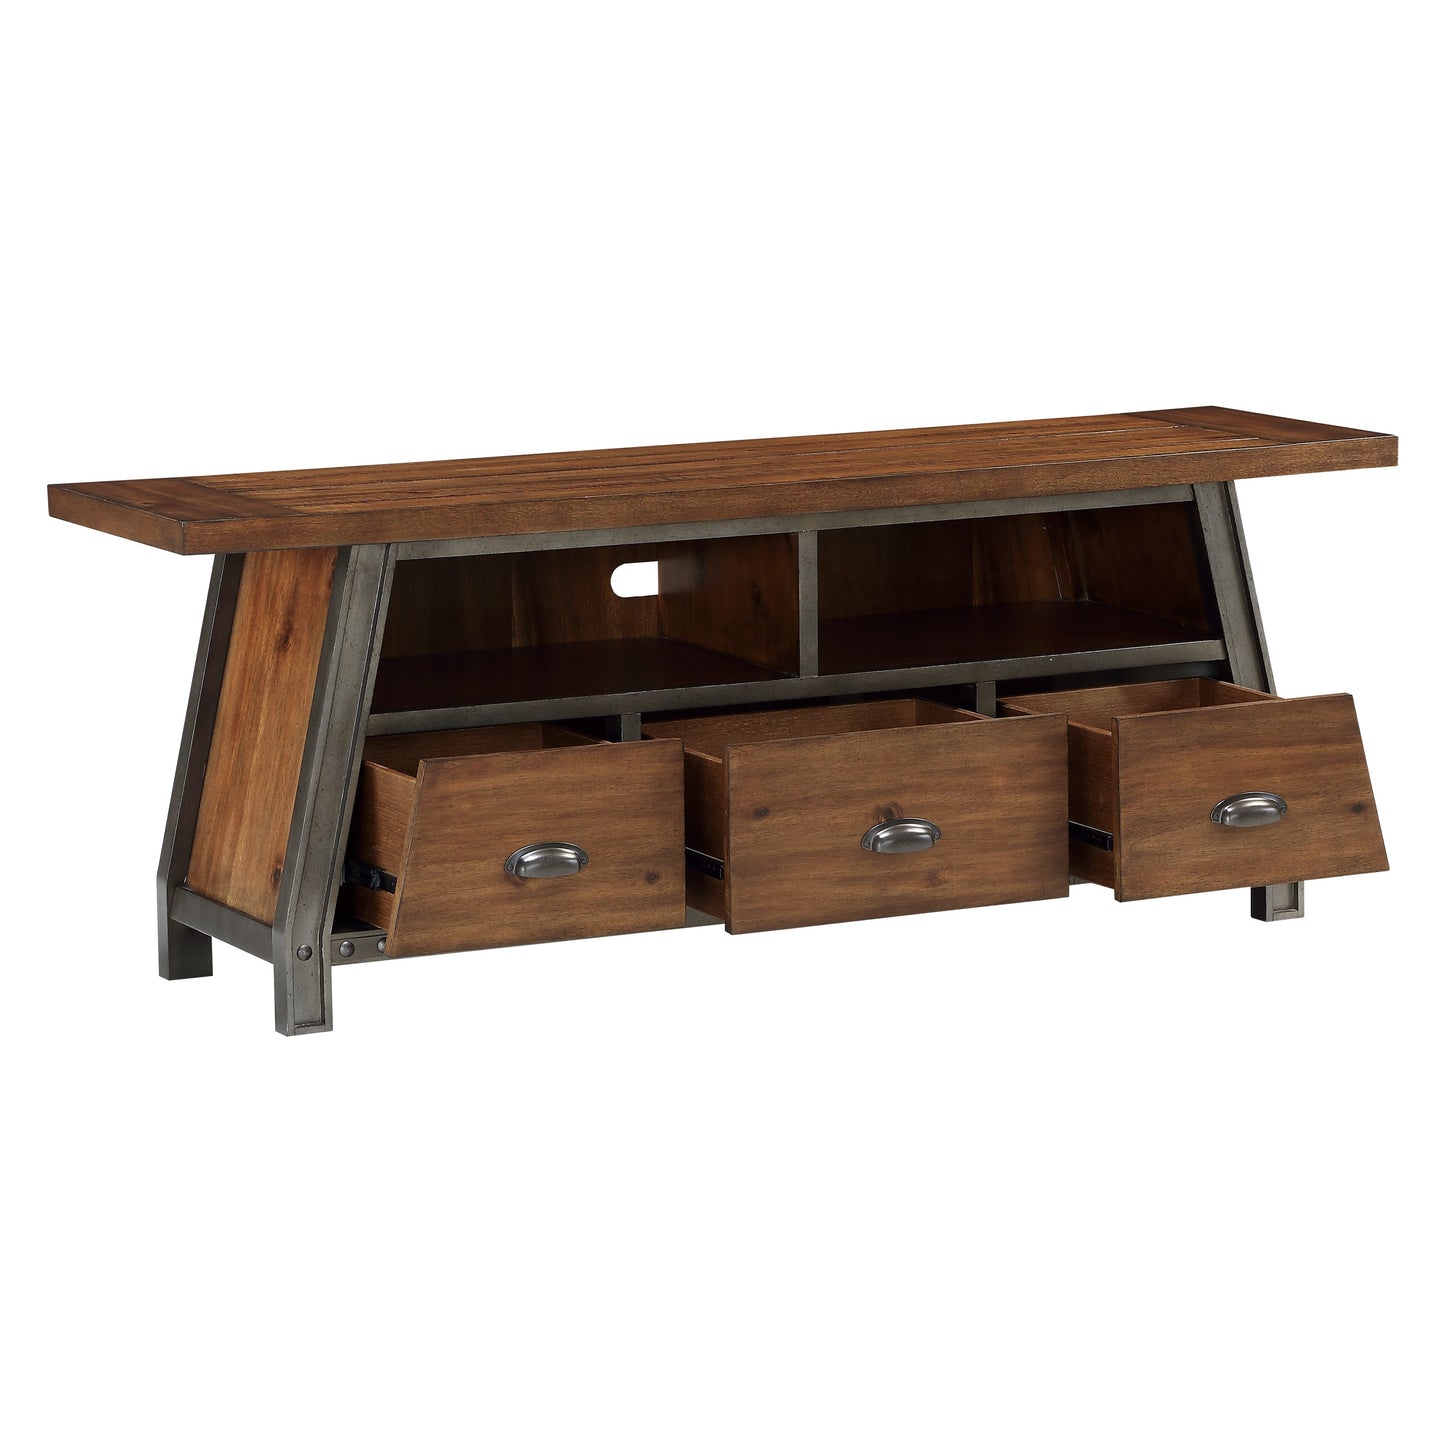 Holverson 64" TV STand RUSTIC BROWN ONLY